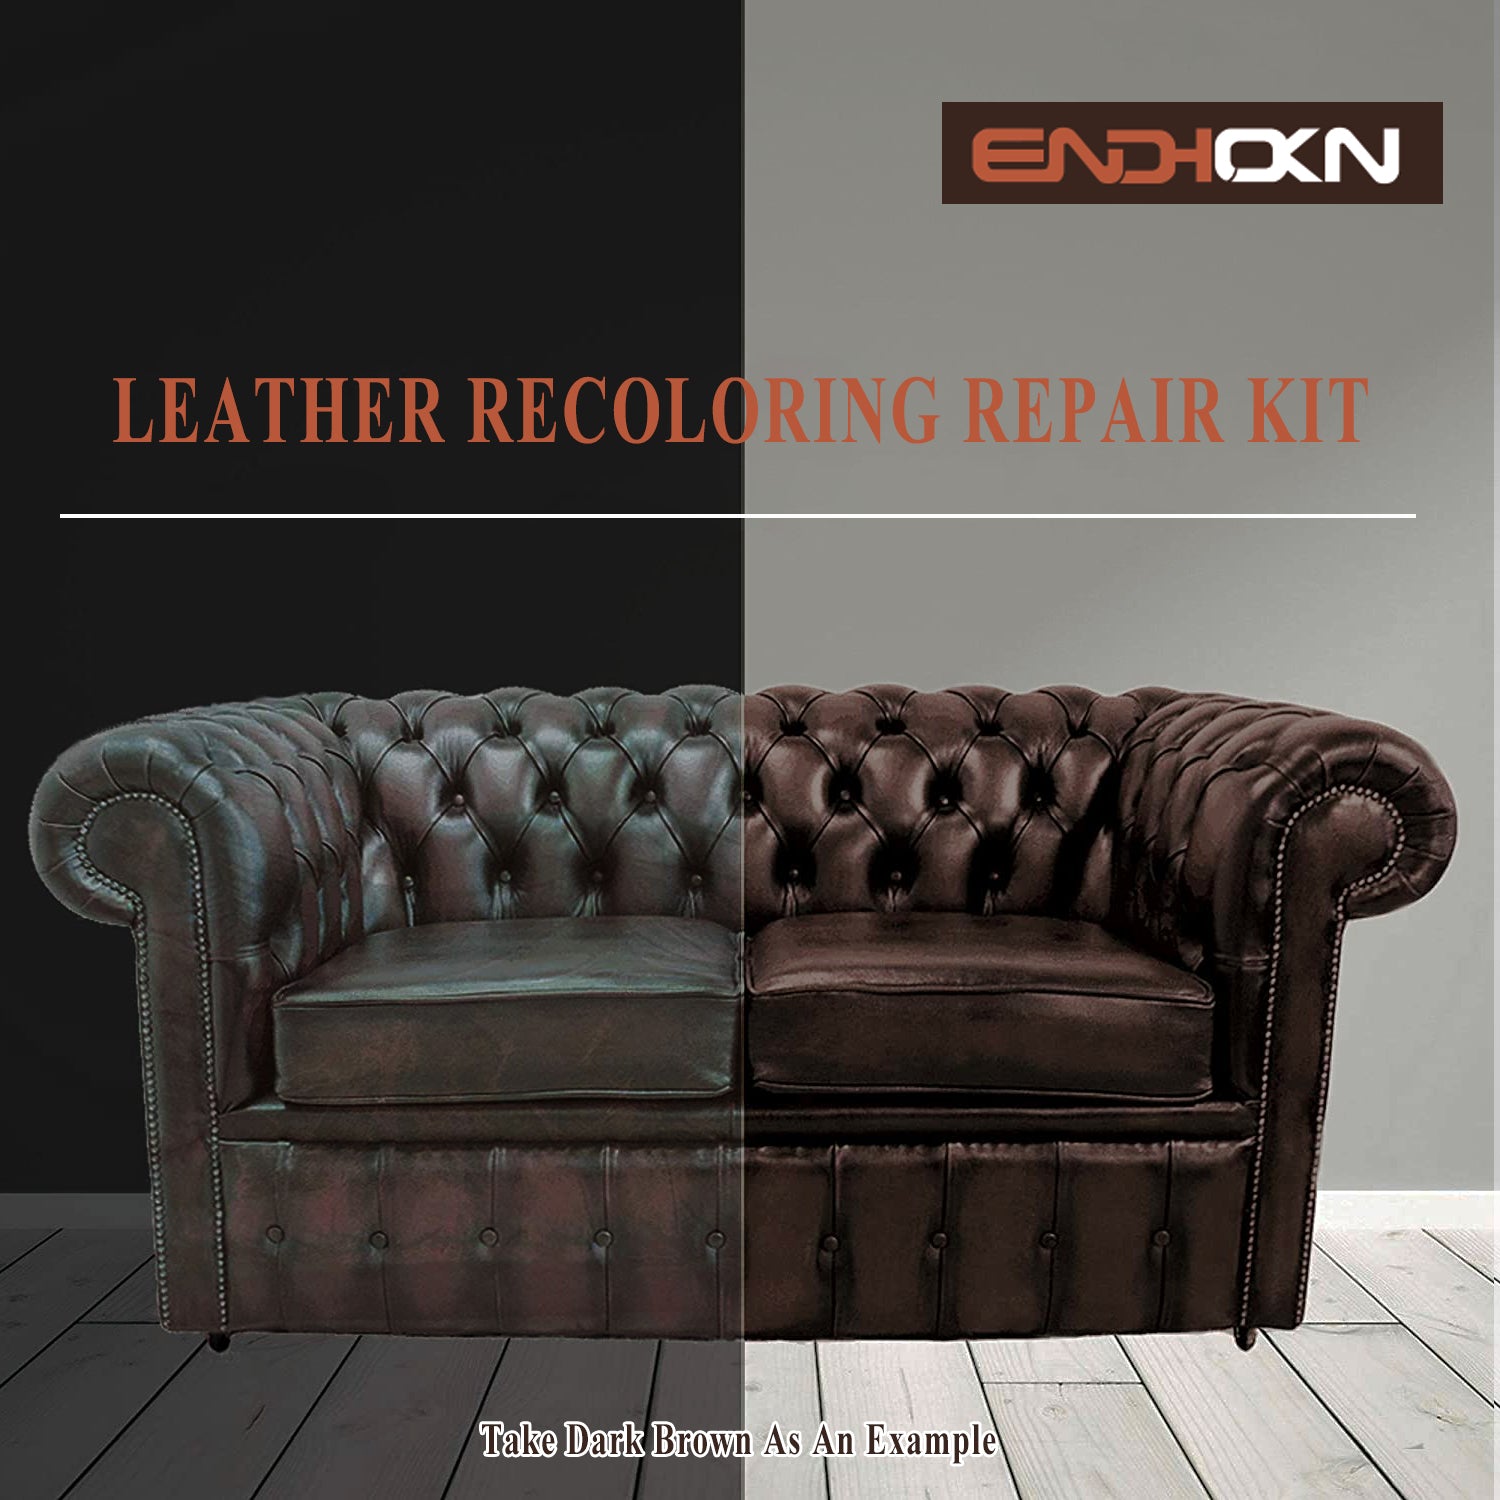 Leather and Vinyl Repair Kit 5 Colors, Endhokn Leather Repair Kit for Sofas, Car Seats, Jackets, Bags, Purse, Belts, Shoes, Holes and Scratch